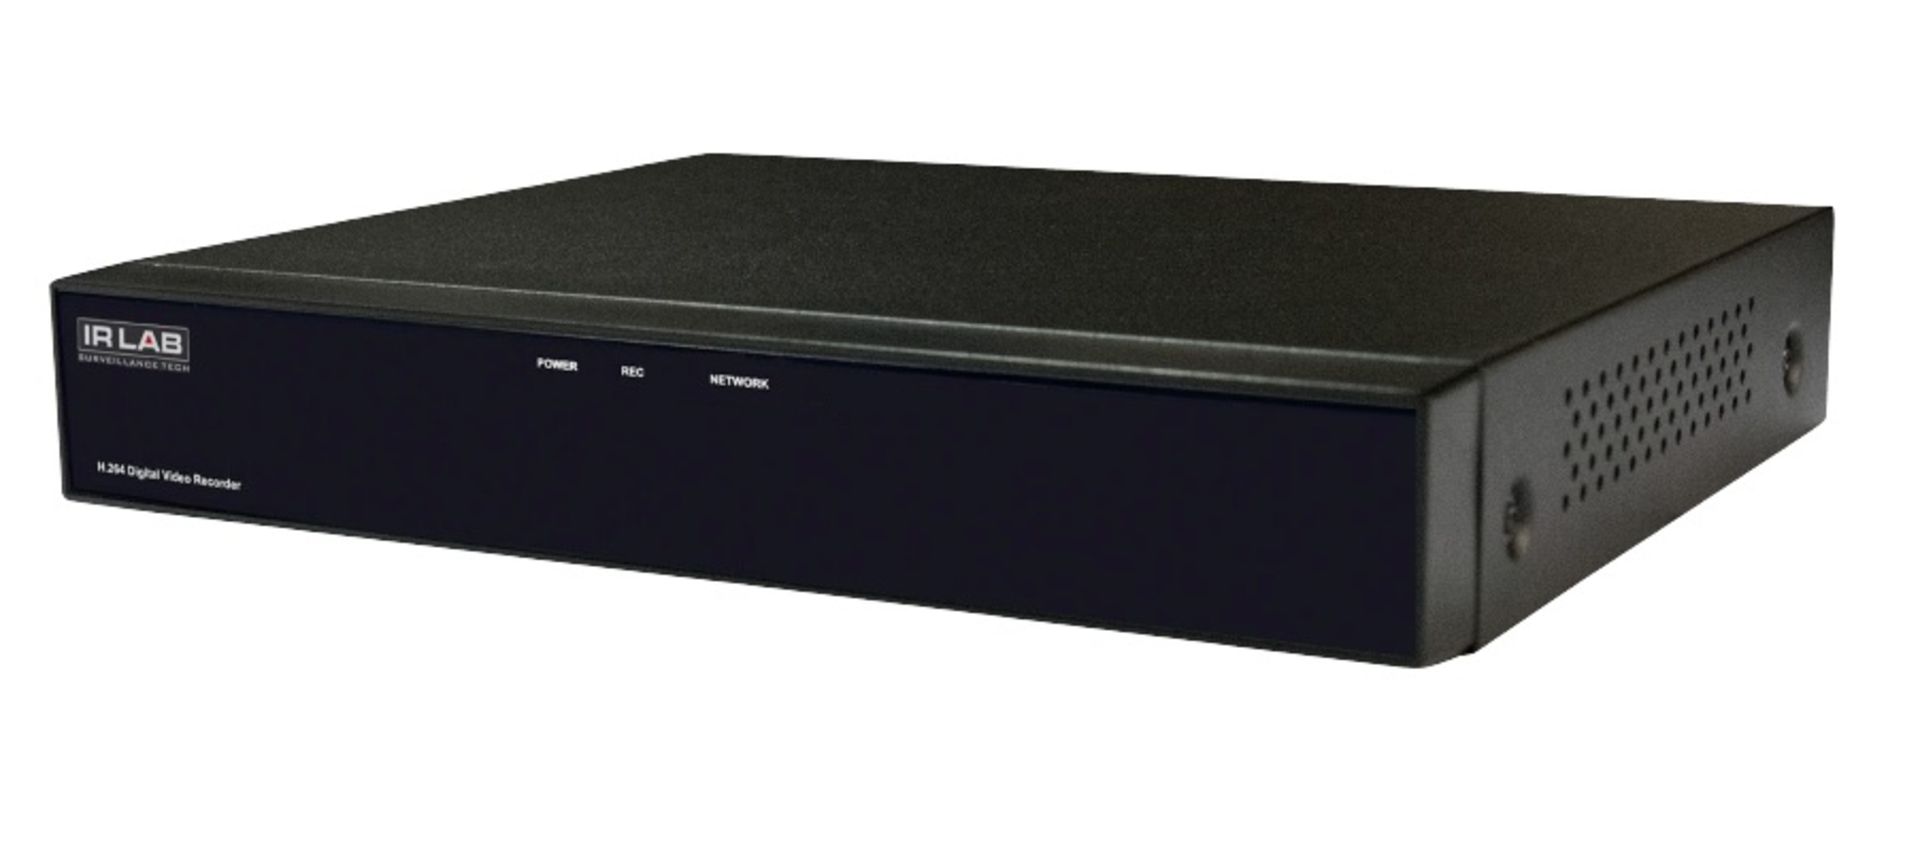 IRLAB HDCVI 5 IN 1 4 Channel DVR and 4x IRLAB 4 IN 1 1080P Starlight IR Dome 2.8-12mm Lens in Black.